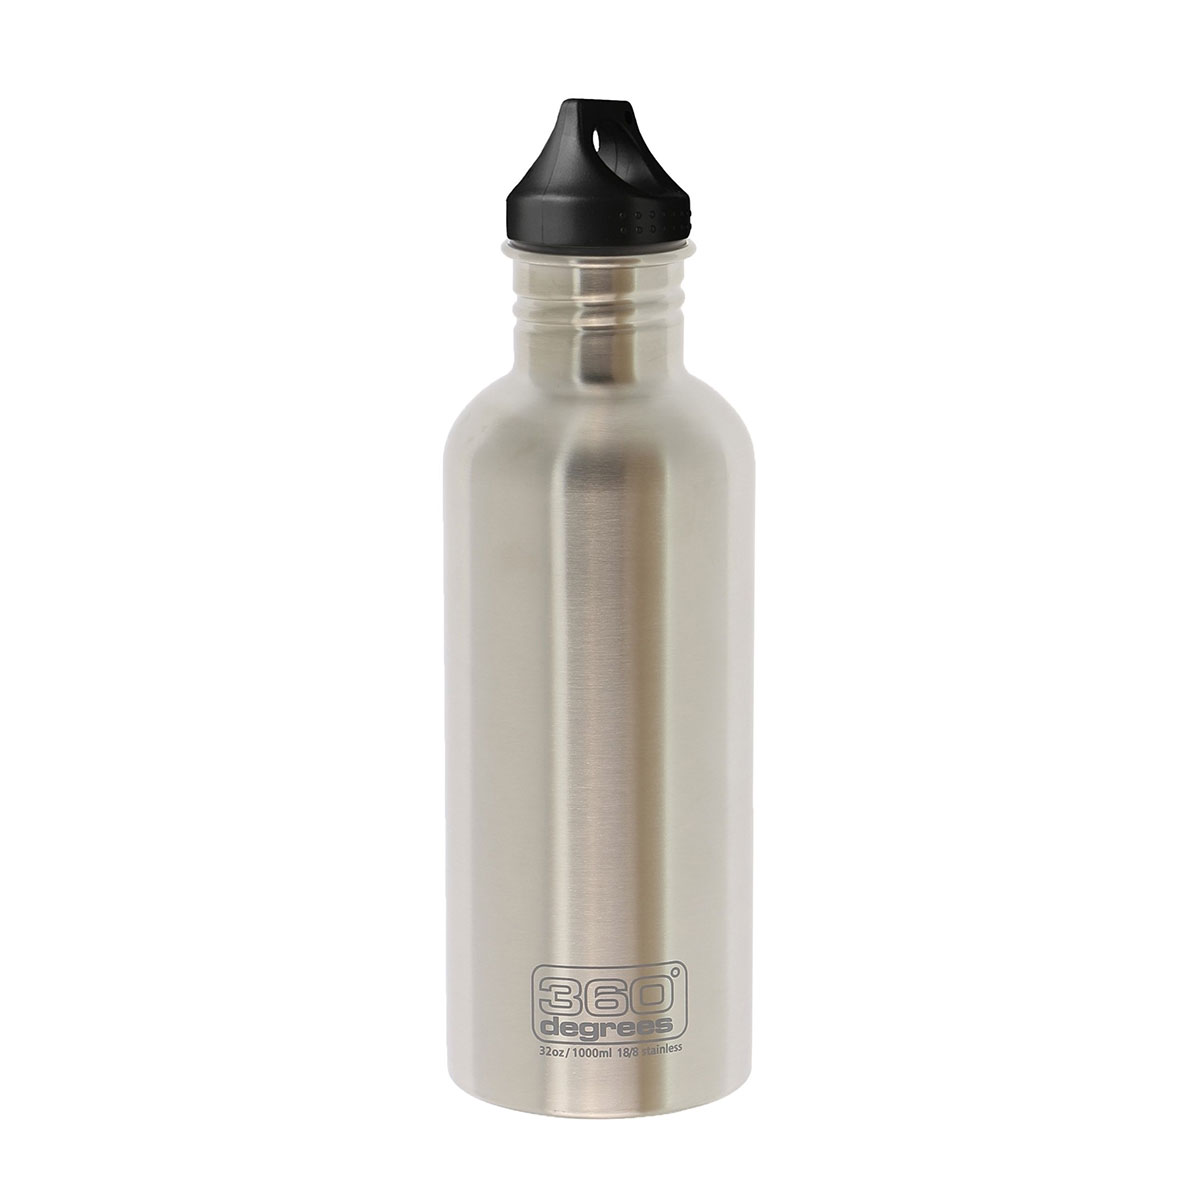 Stainless Drink Bottle 1 l